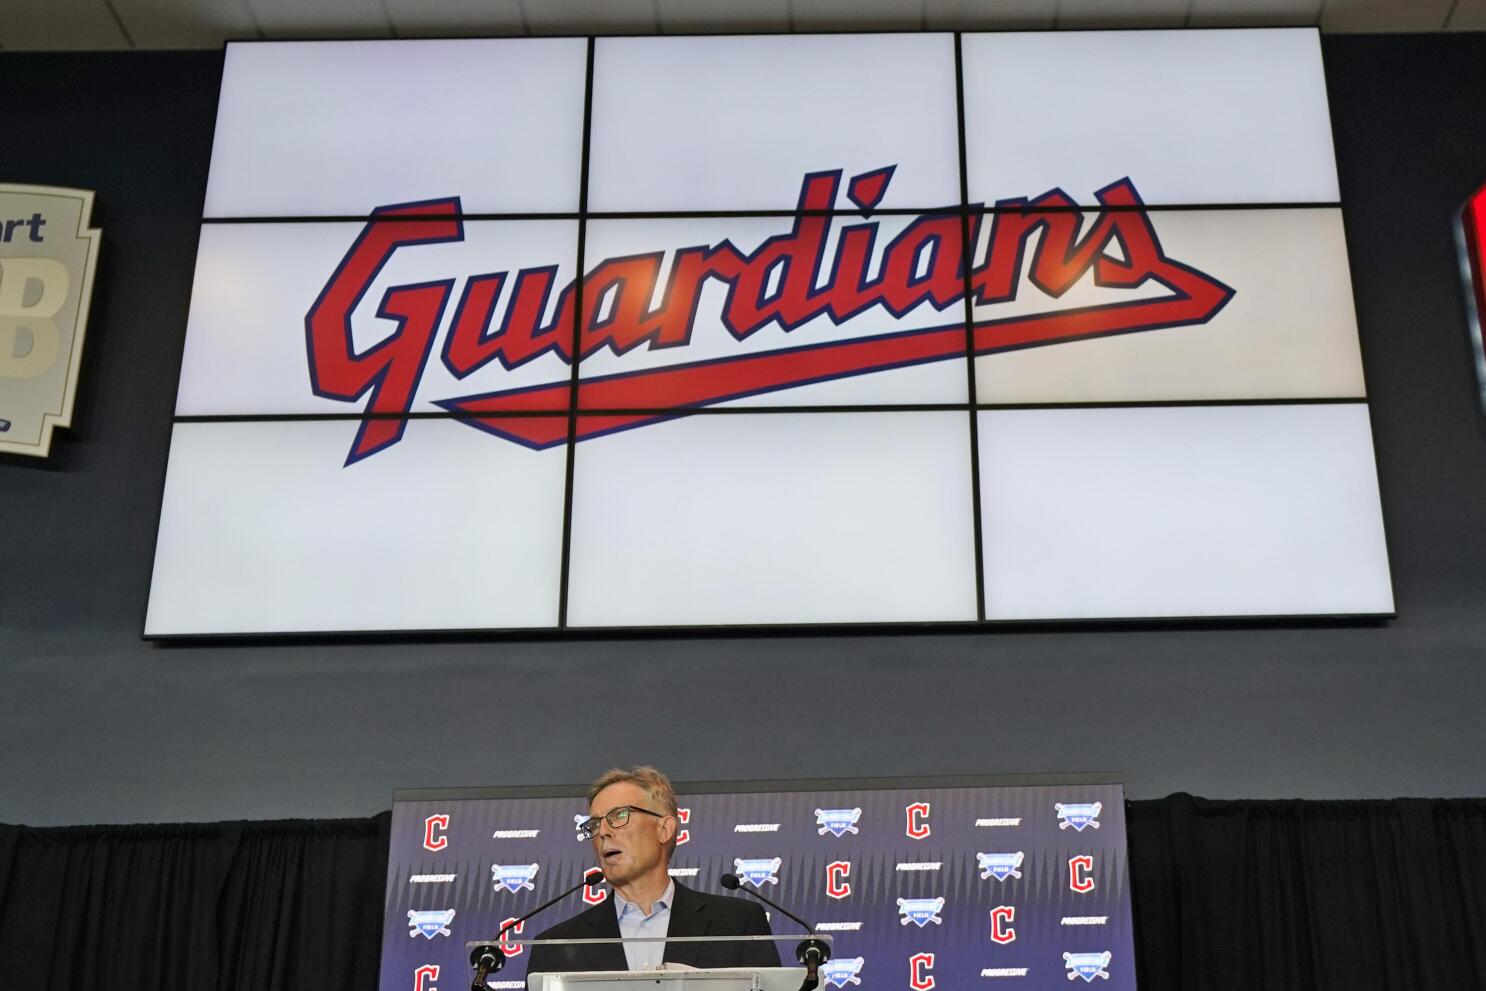 Cleveland baseball team changes name to Guardians; social media reacts